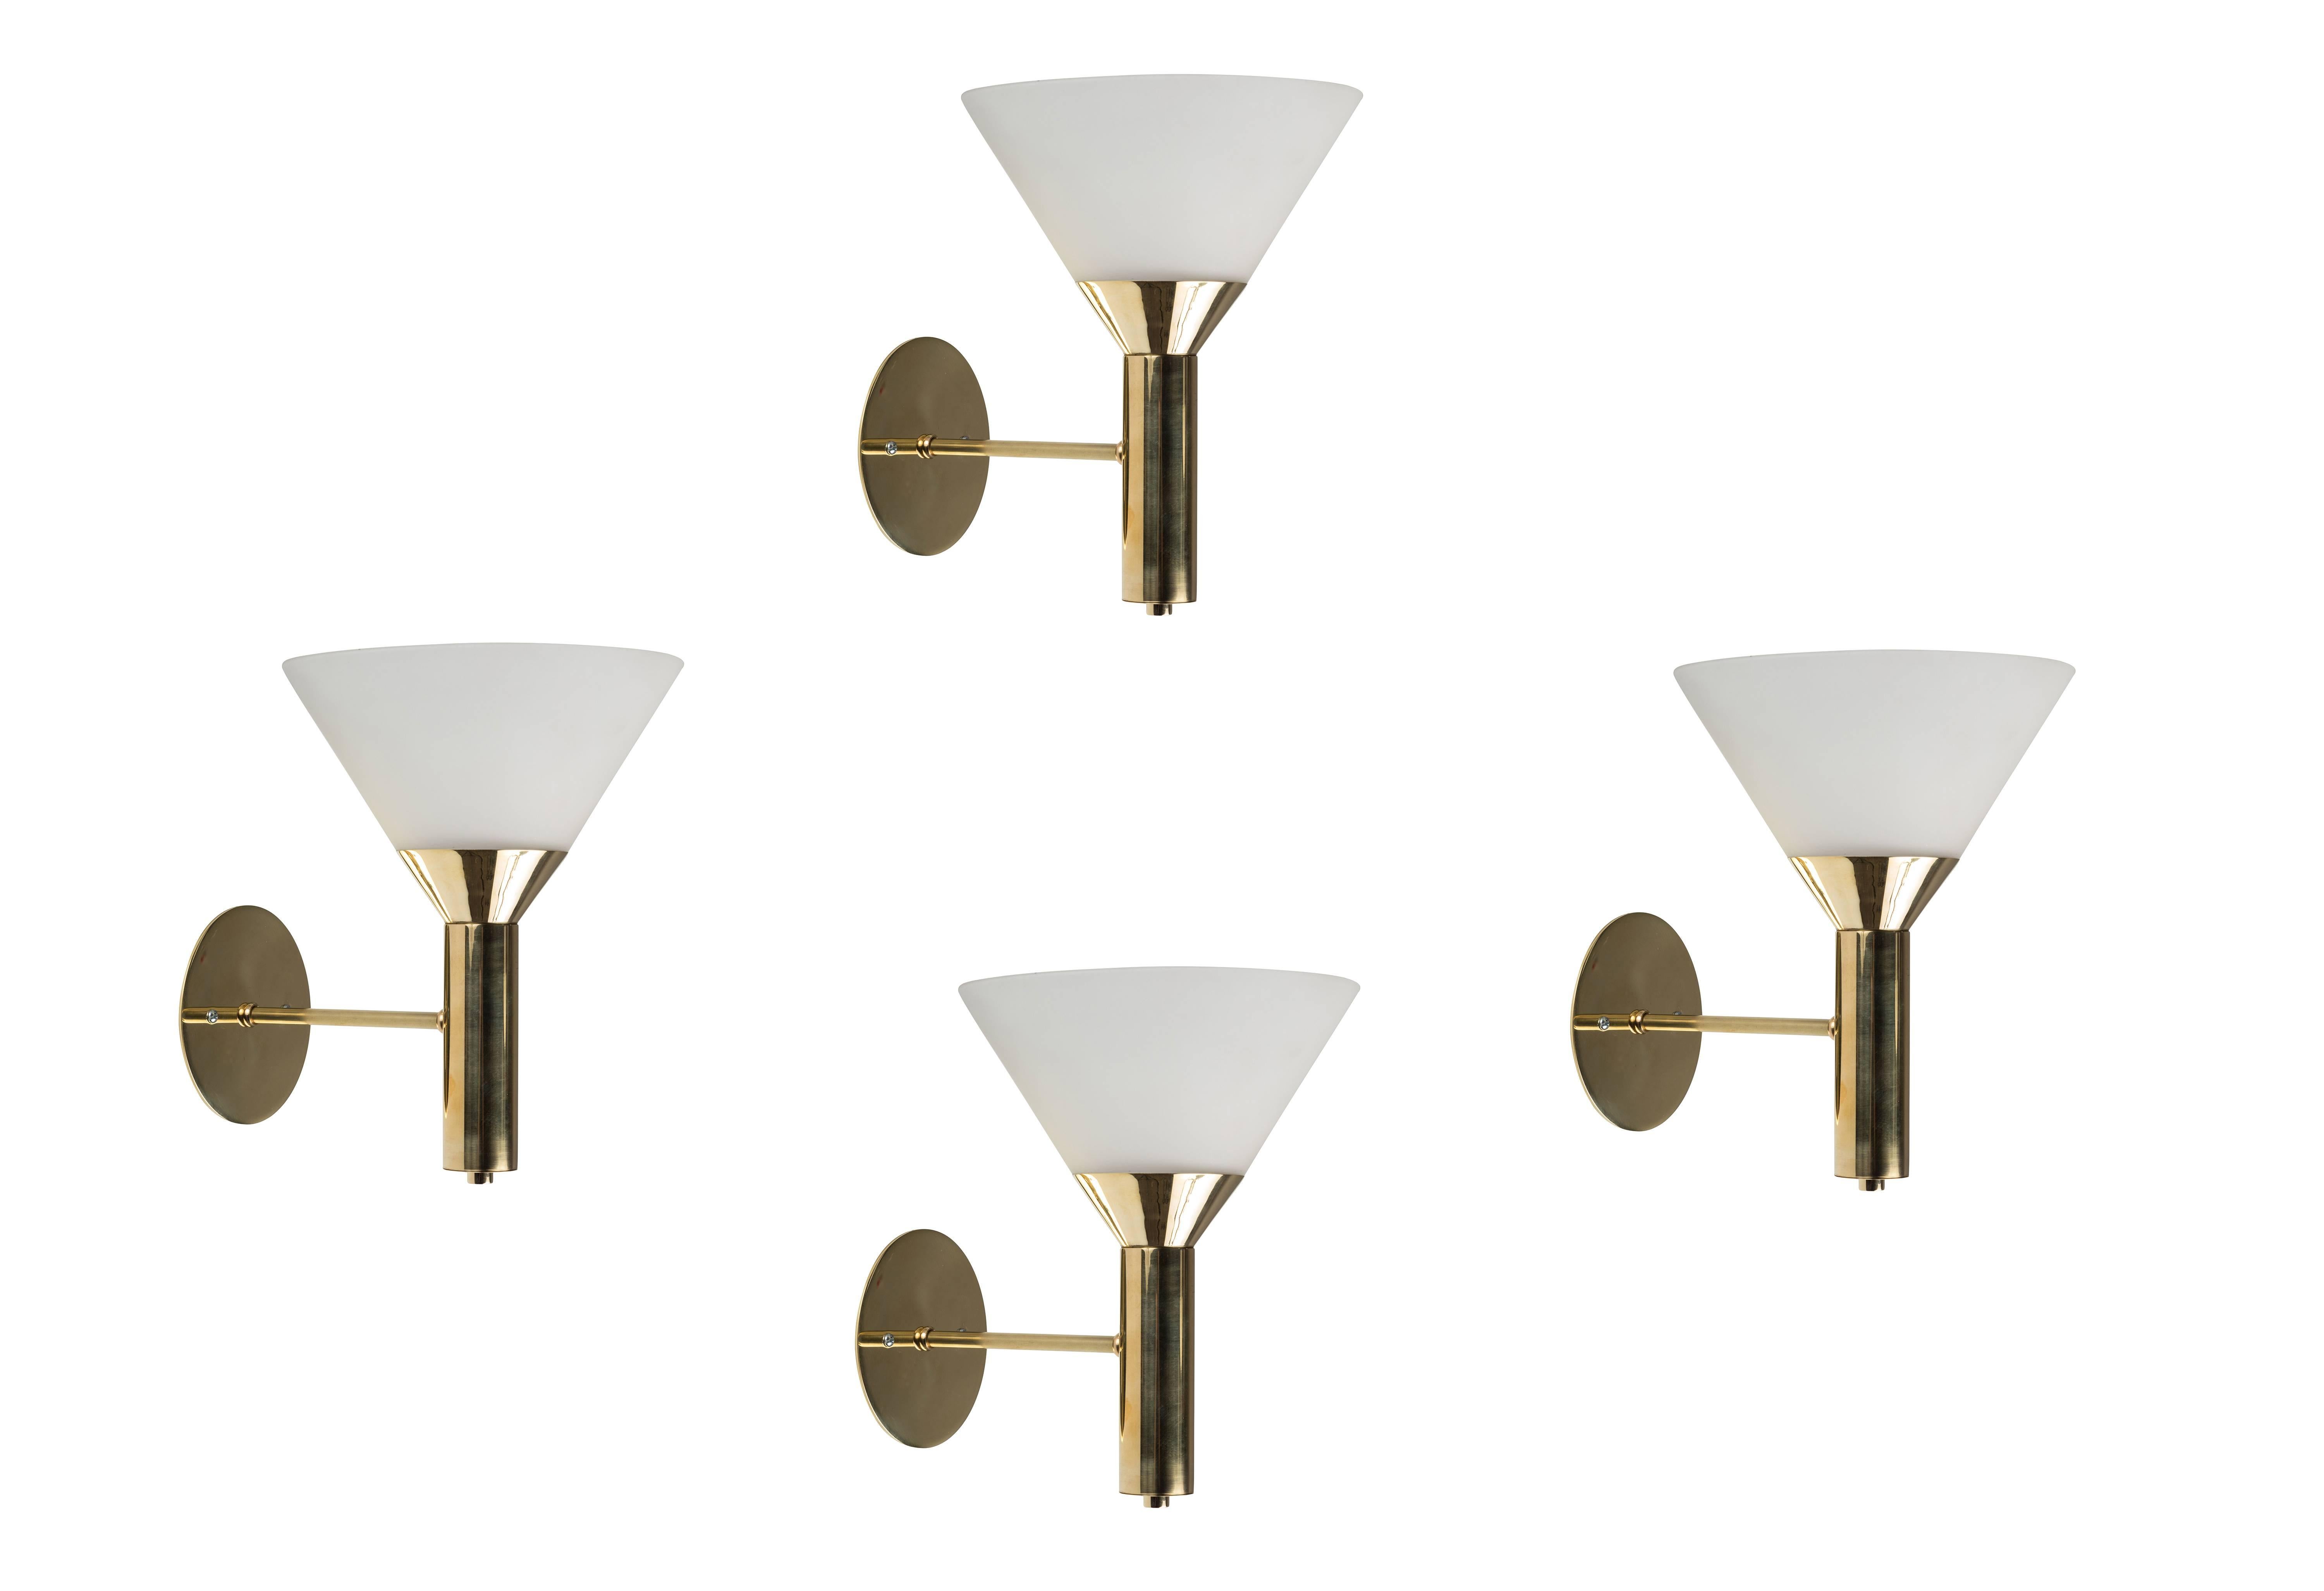 1950s Italian glass and brass cone sconces. Executed in polished brass and conical opaline glass in the manner of Stilnovo. A sculptural and refined lighting design reflecting midcentury Italian aesthetics at their highest level.

Price is per